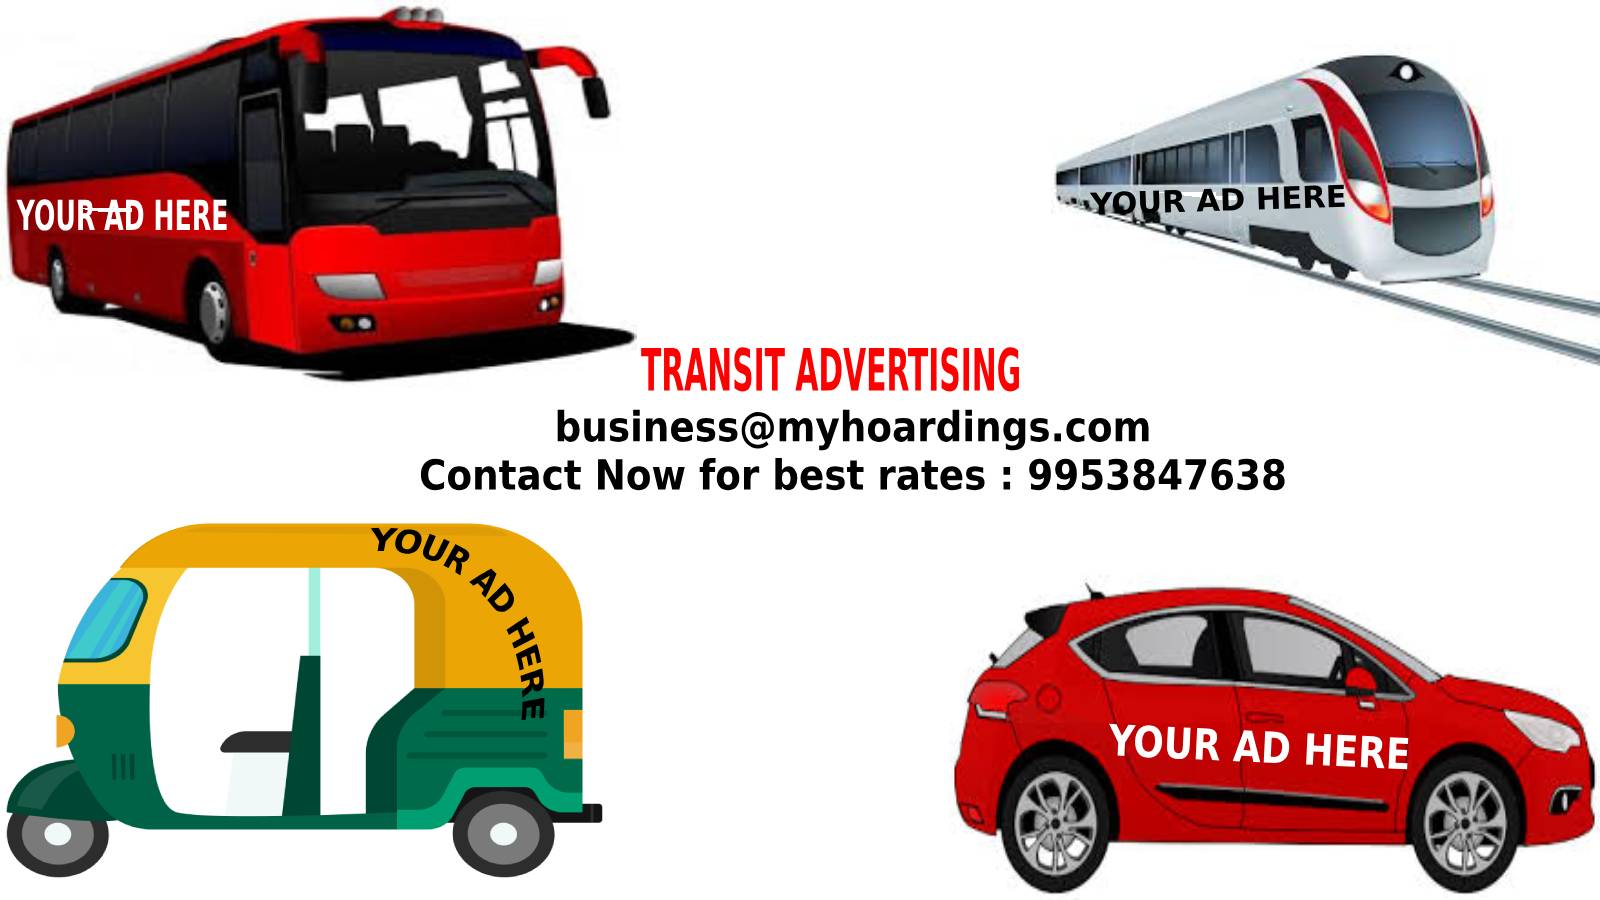 Transit Advertising,Cycle Ads,Railway Ads,Auto Rickshaw Advertising,Cab advertising